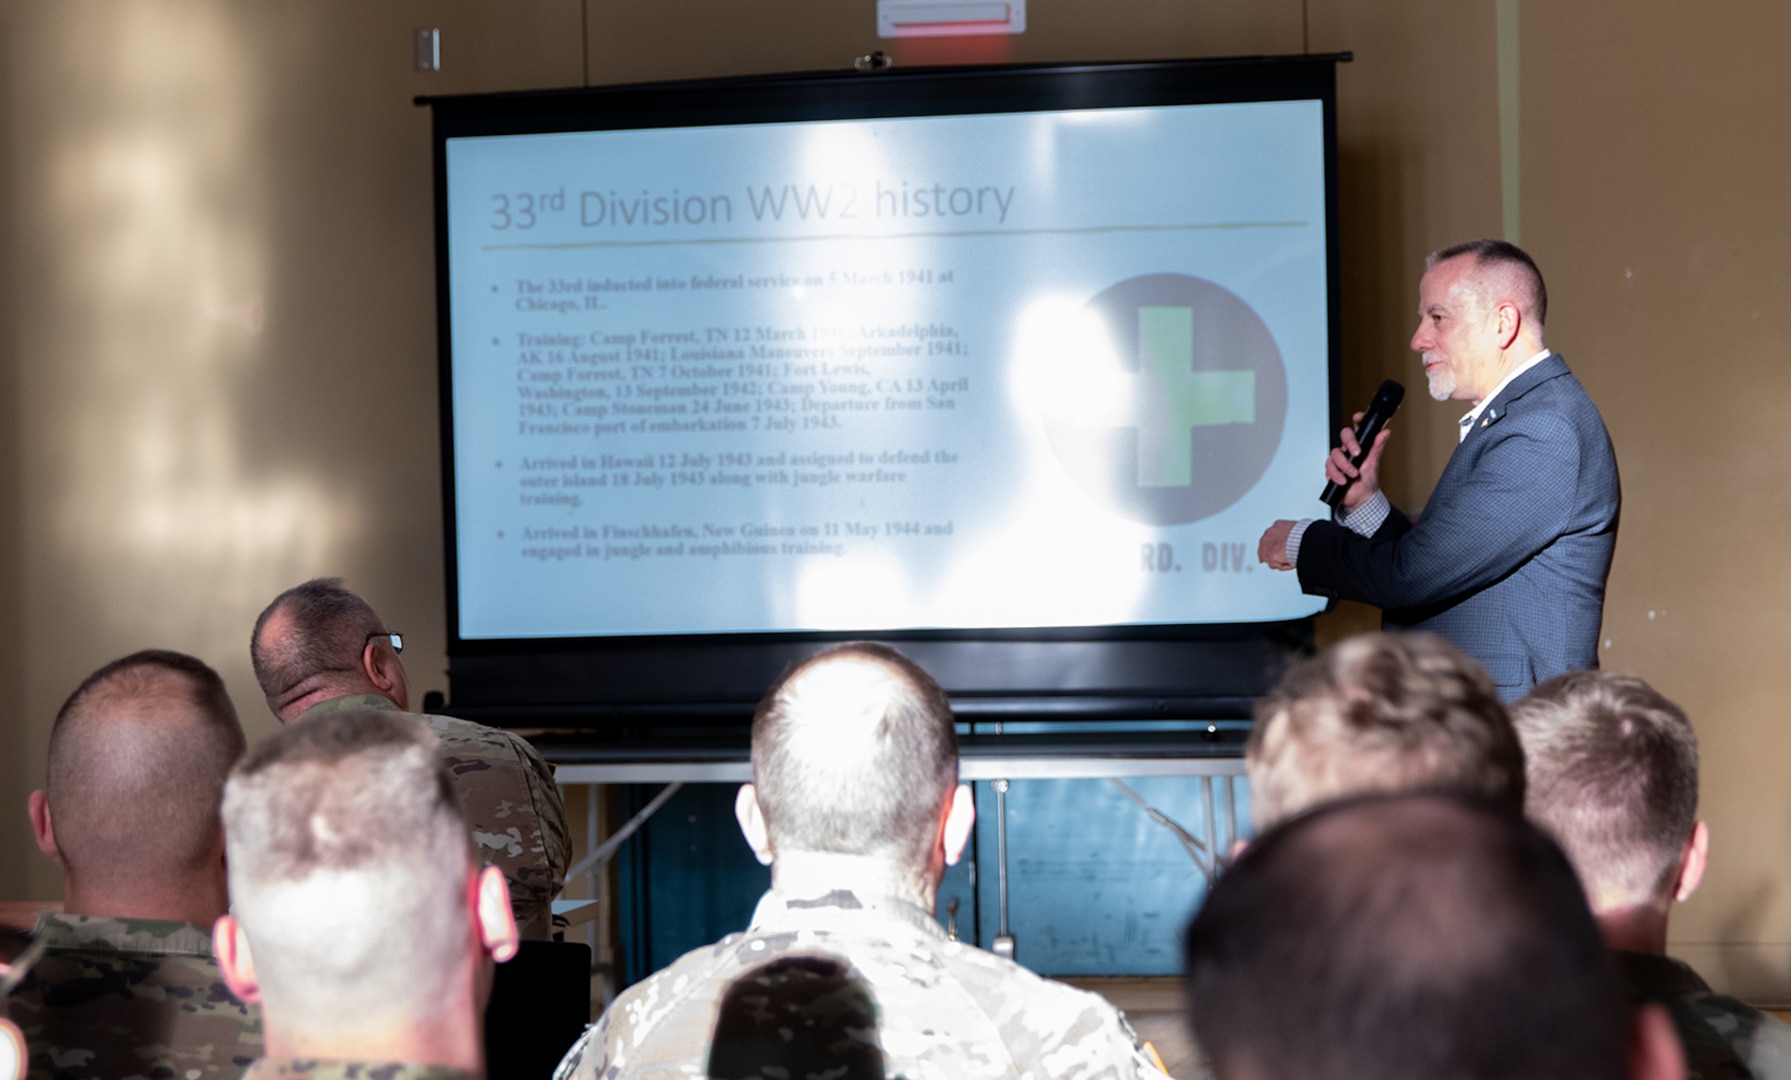 Command Sgt. Maj. (ret.) Mark Bowman talks about the history of the 33rd Division during World War II, during the Liberation of Baguio commemoration event at the Urbana Armory April 26.